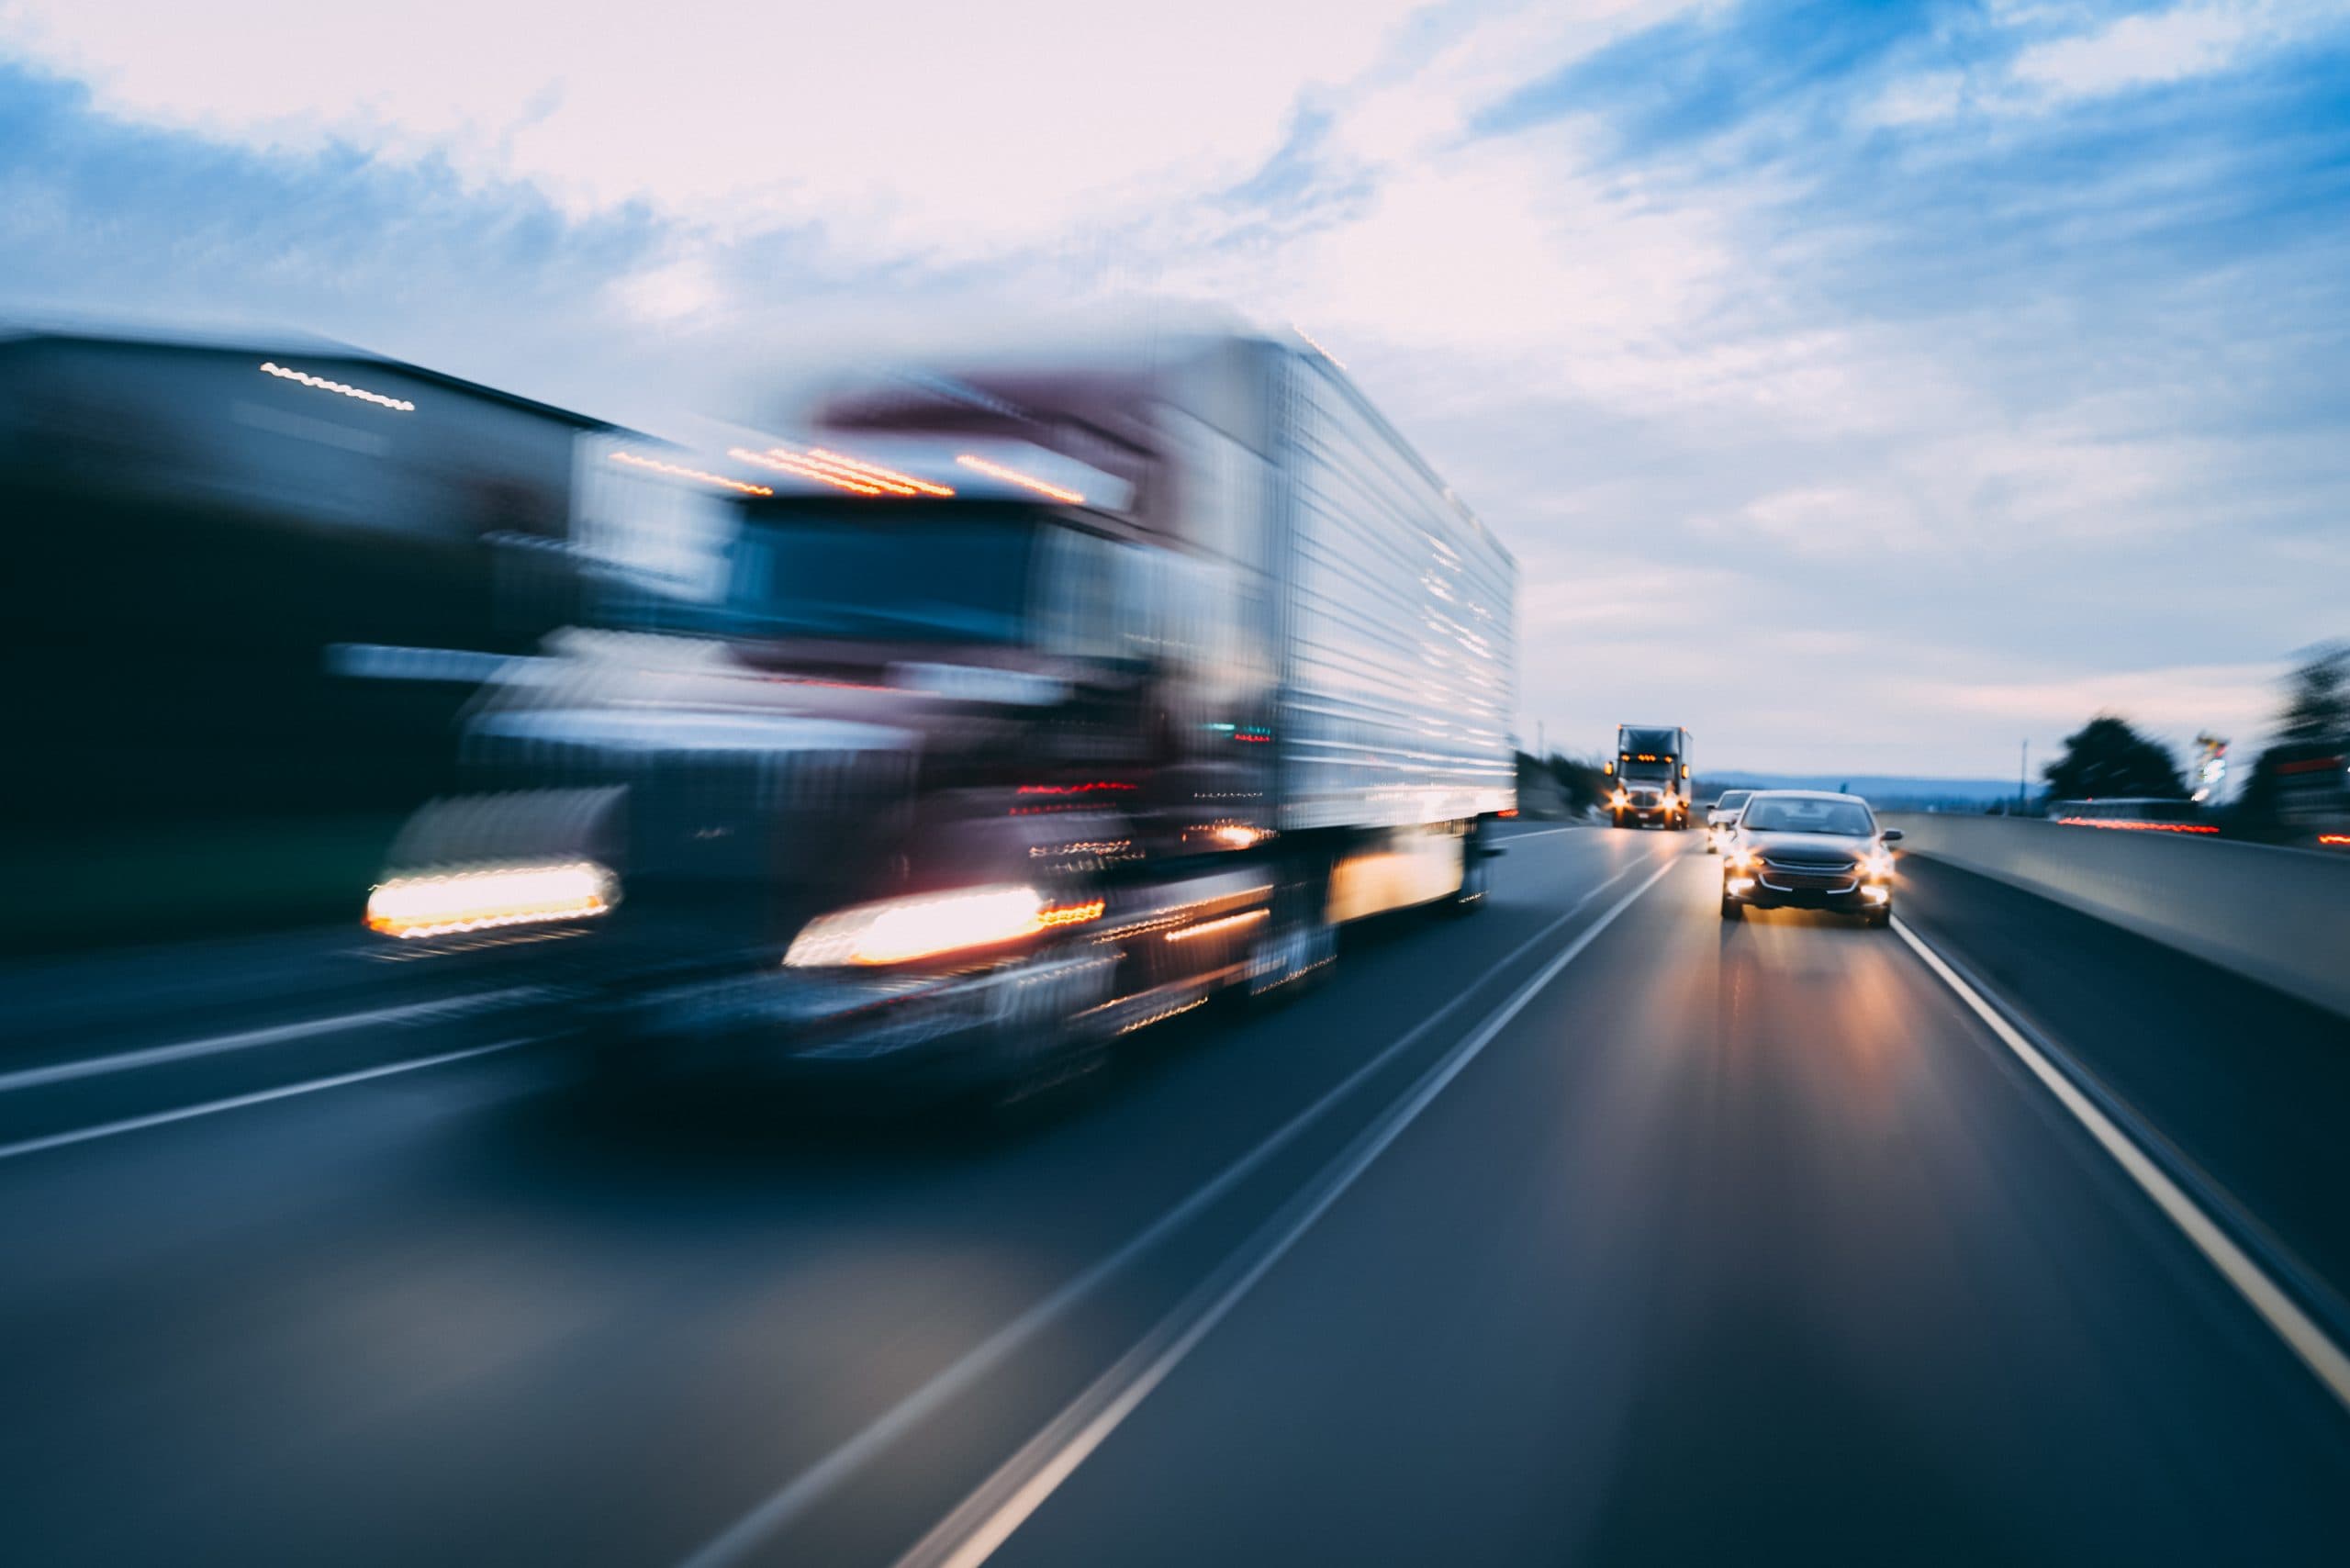 What Are the Types of Injuries Commonly Suffered in Trucking Accidents?